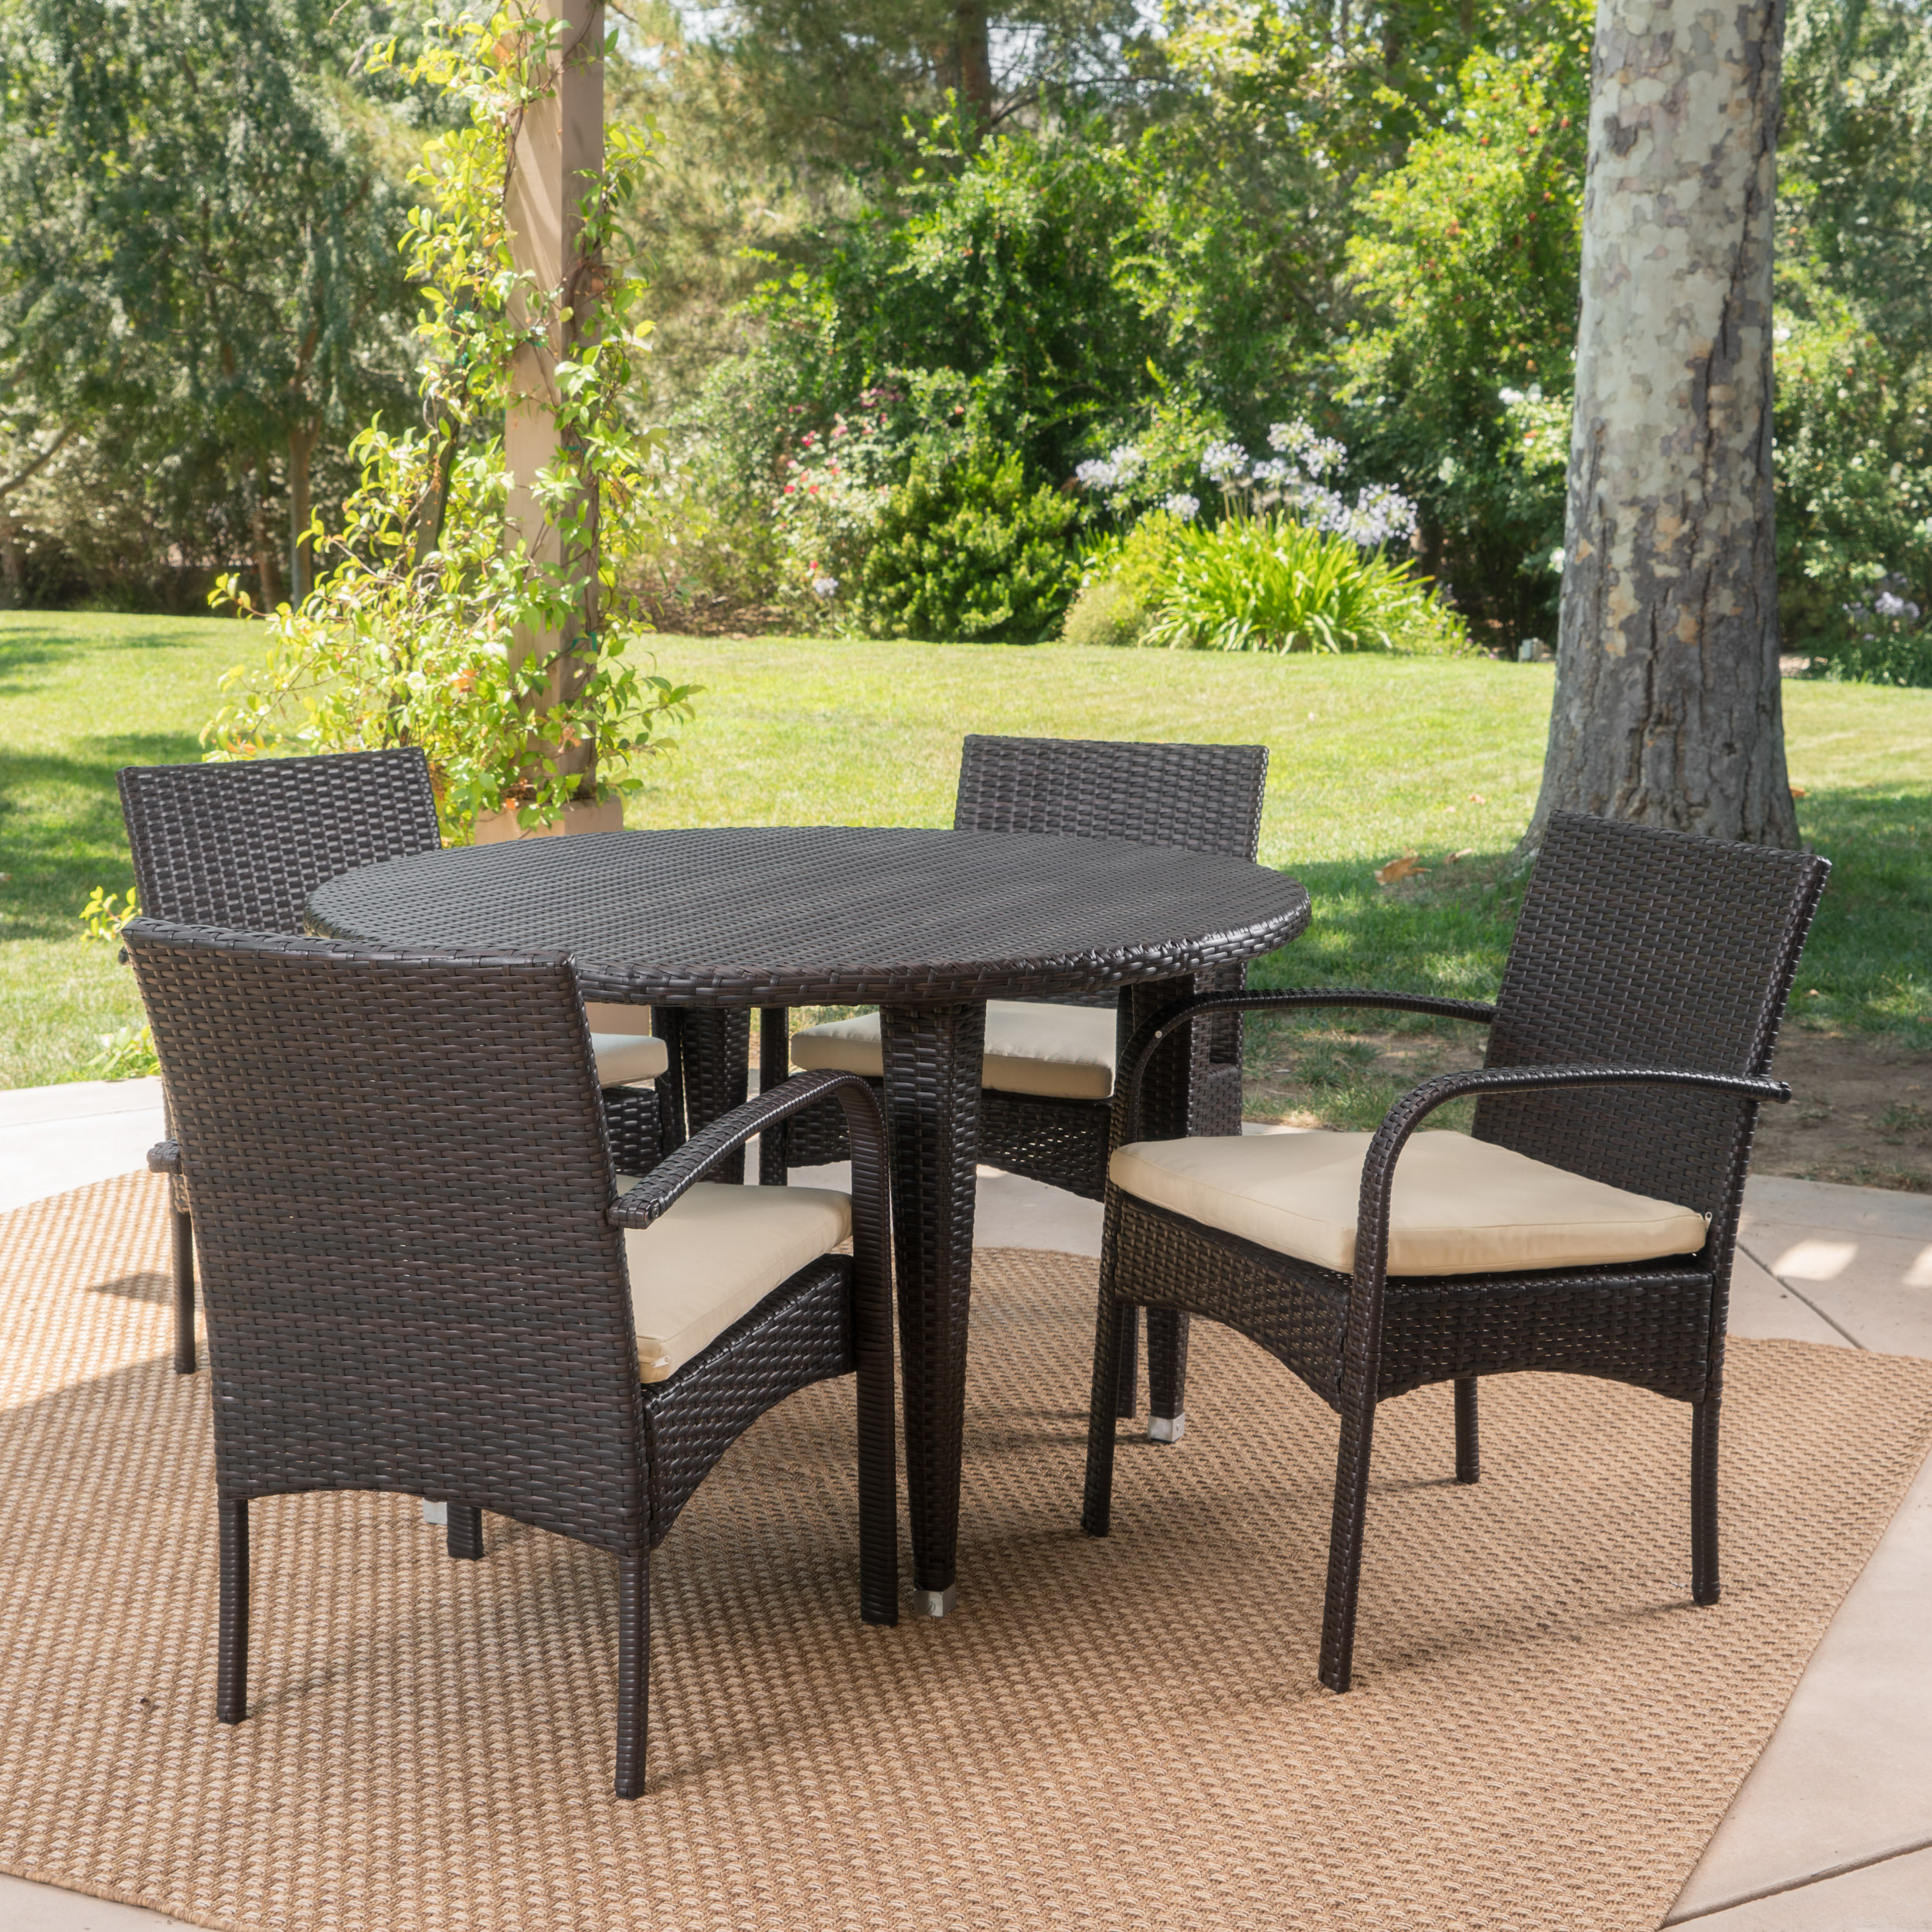 Cole Outdoor 5 Piece Wicker Circular Dining Set with Cushions, Multibrown, Crme - image 9 of 9